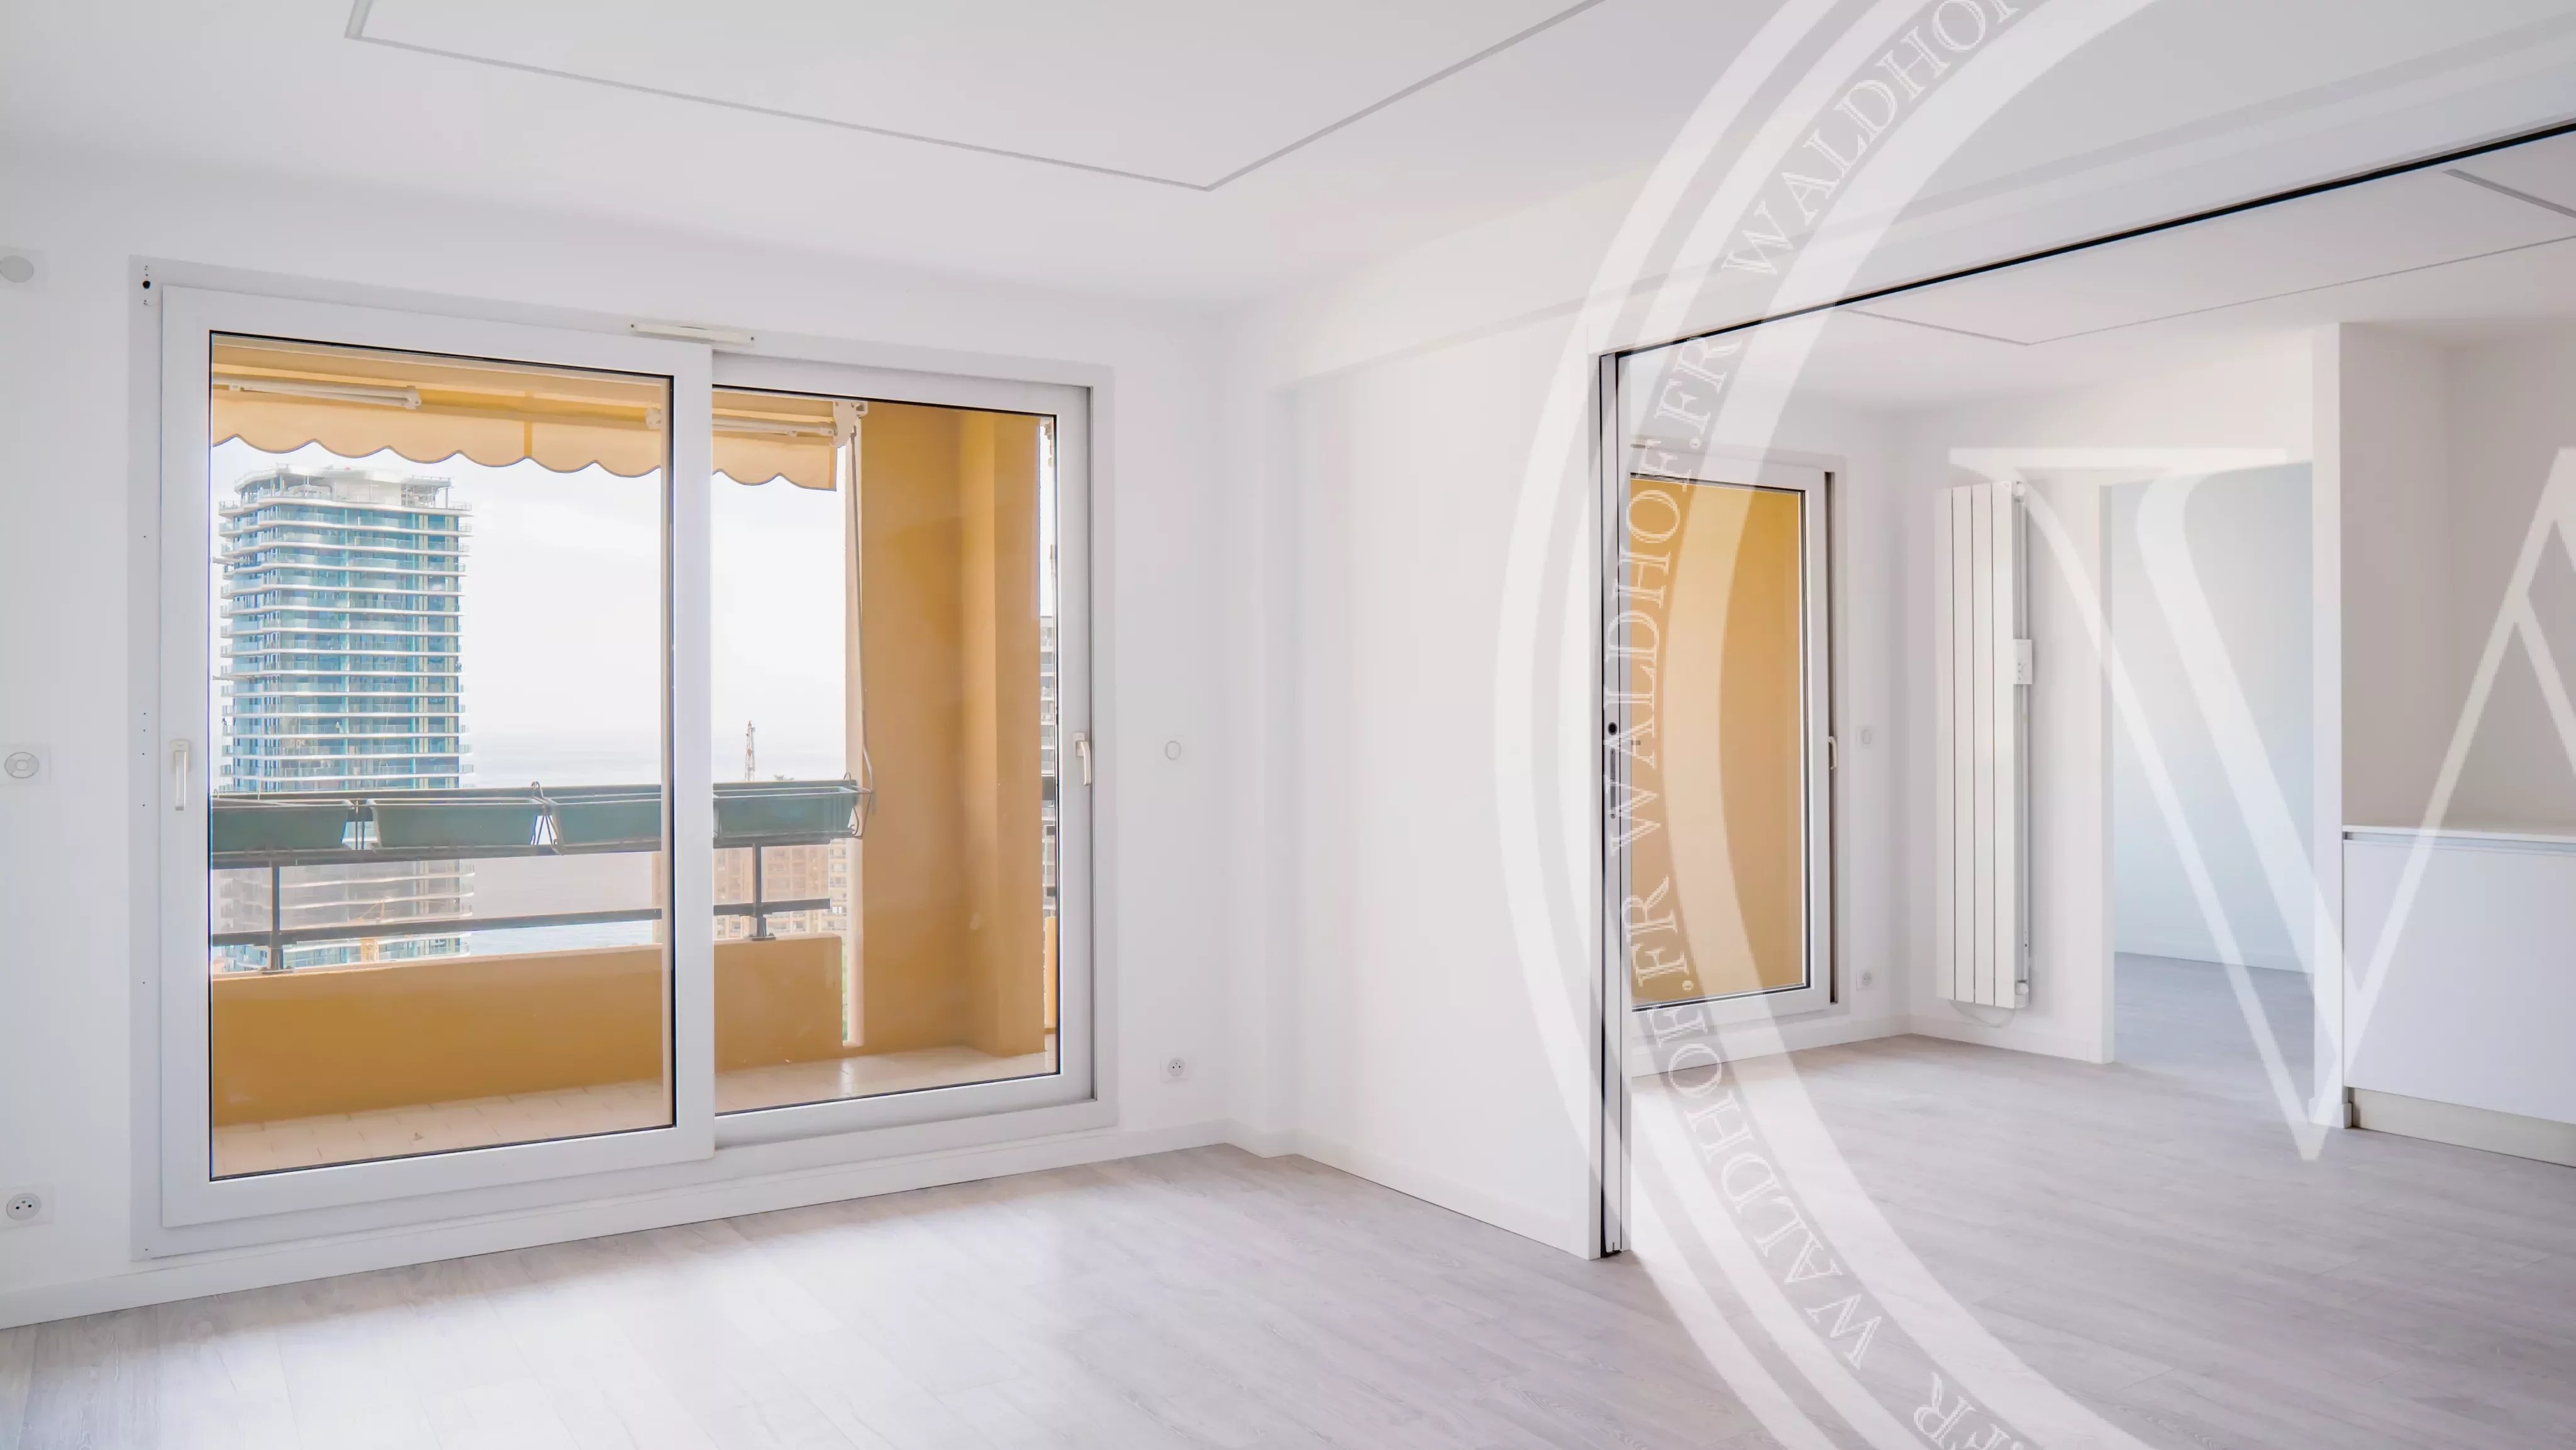 Newly renovated 3-bedroom flat with sea view close to Monaco